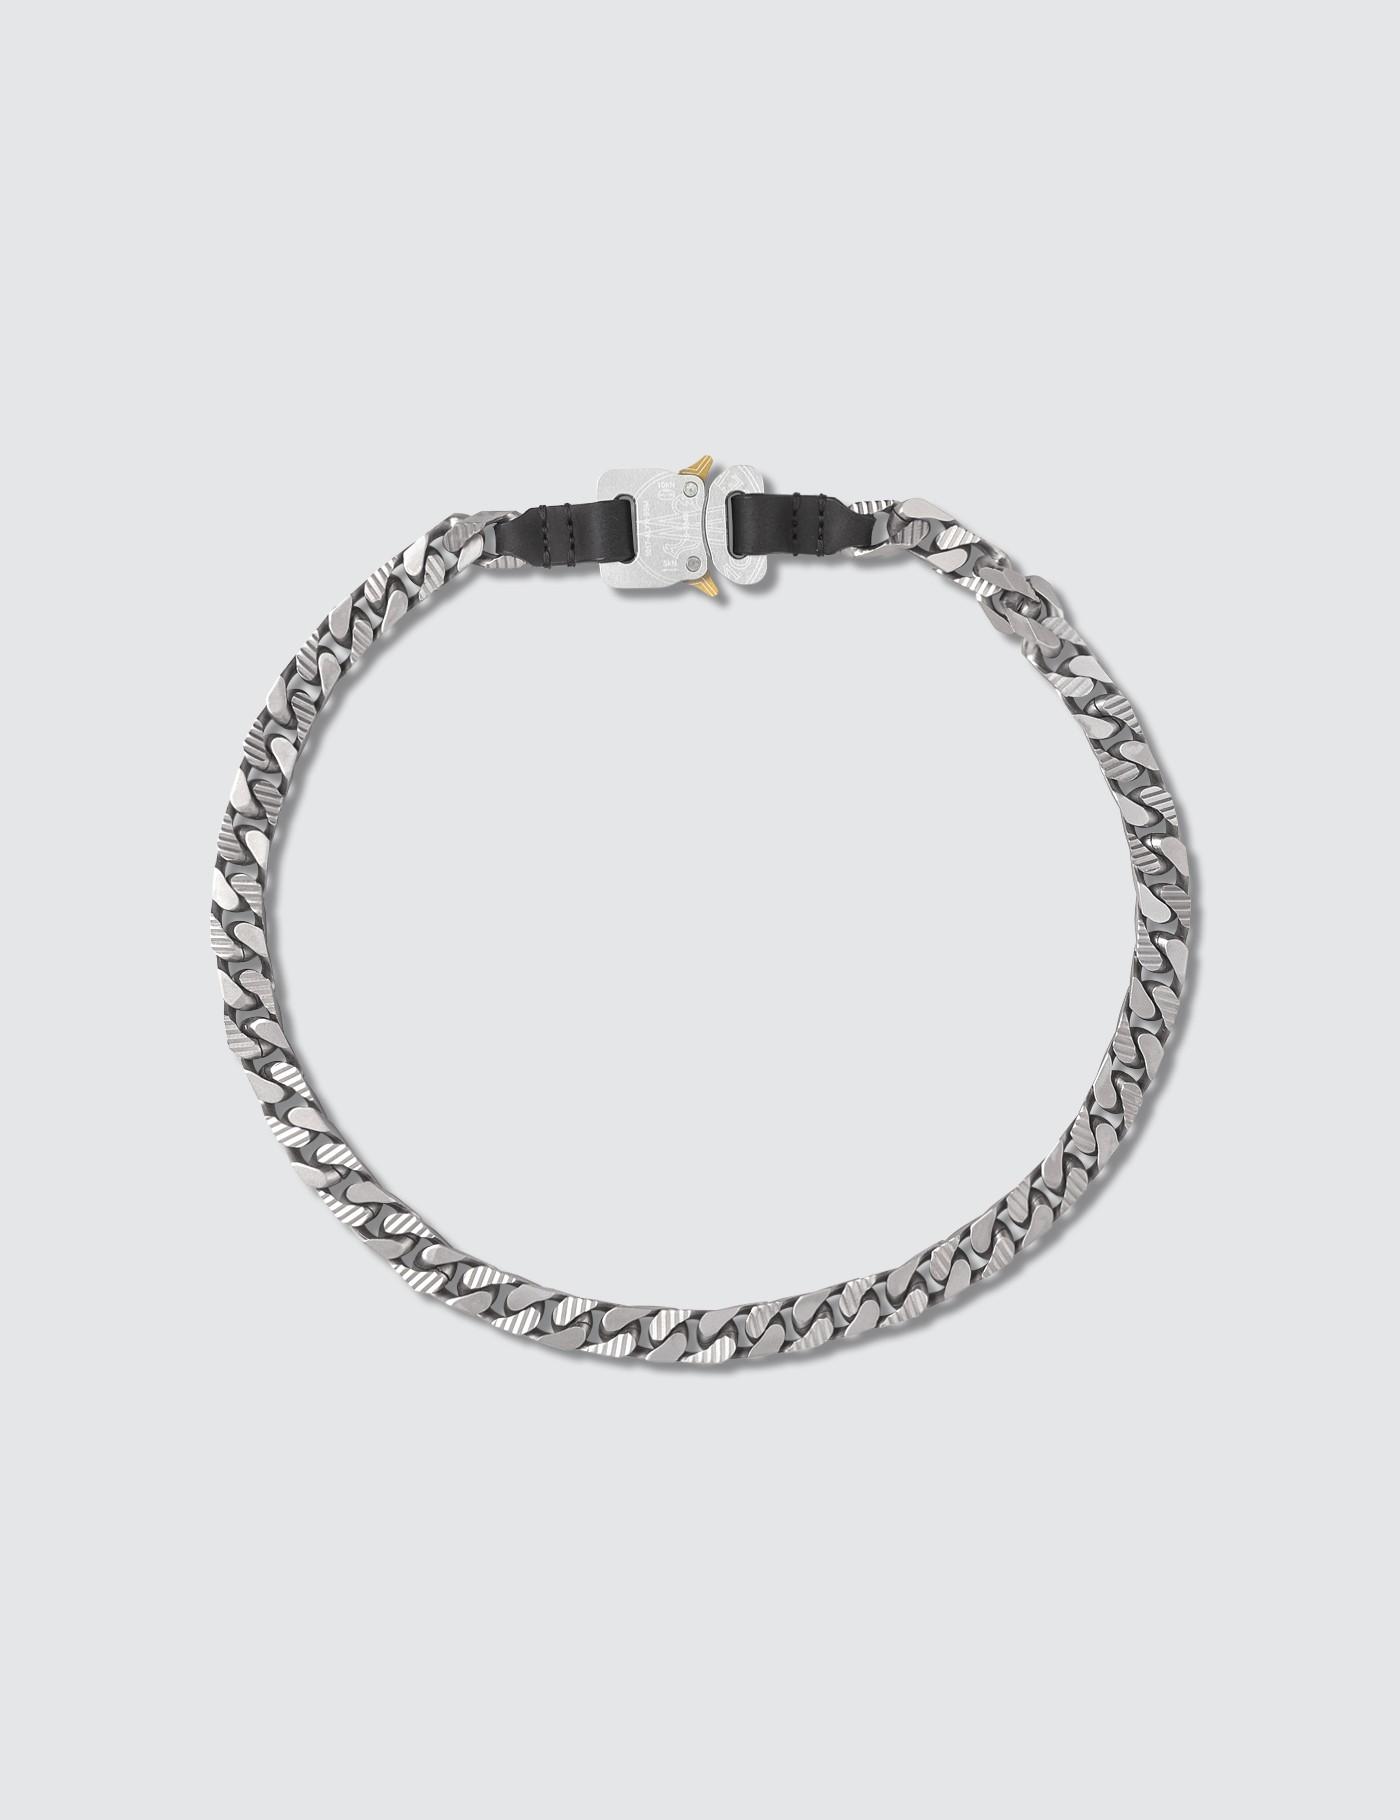 Moncler Genius X 1017 Alyx 9sm Necklace in White for Men - Lyst